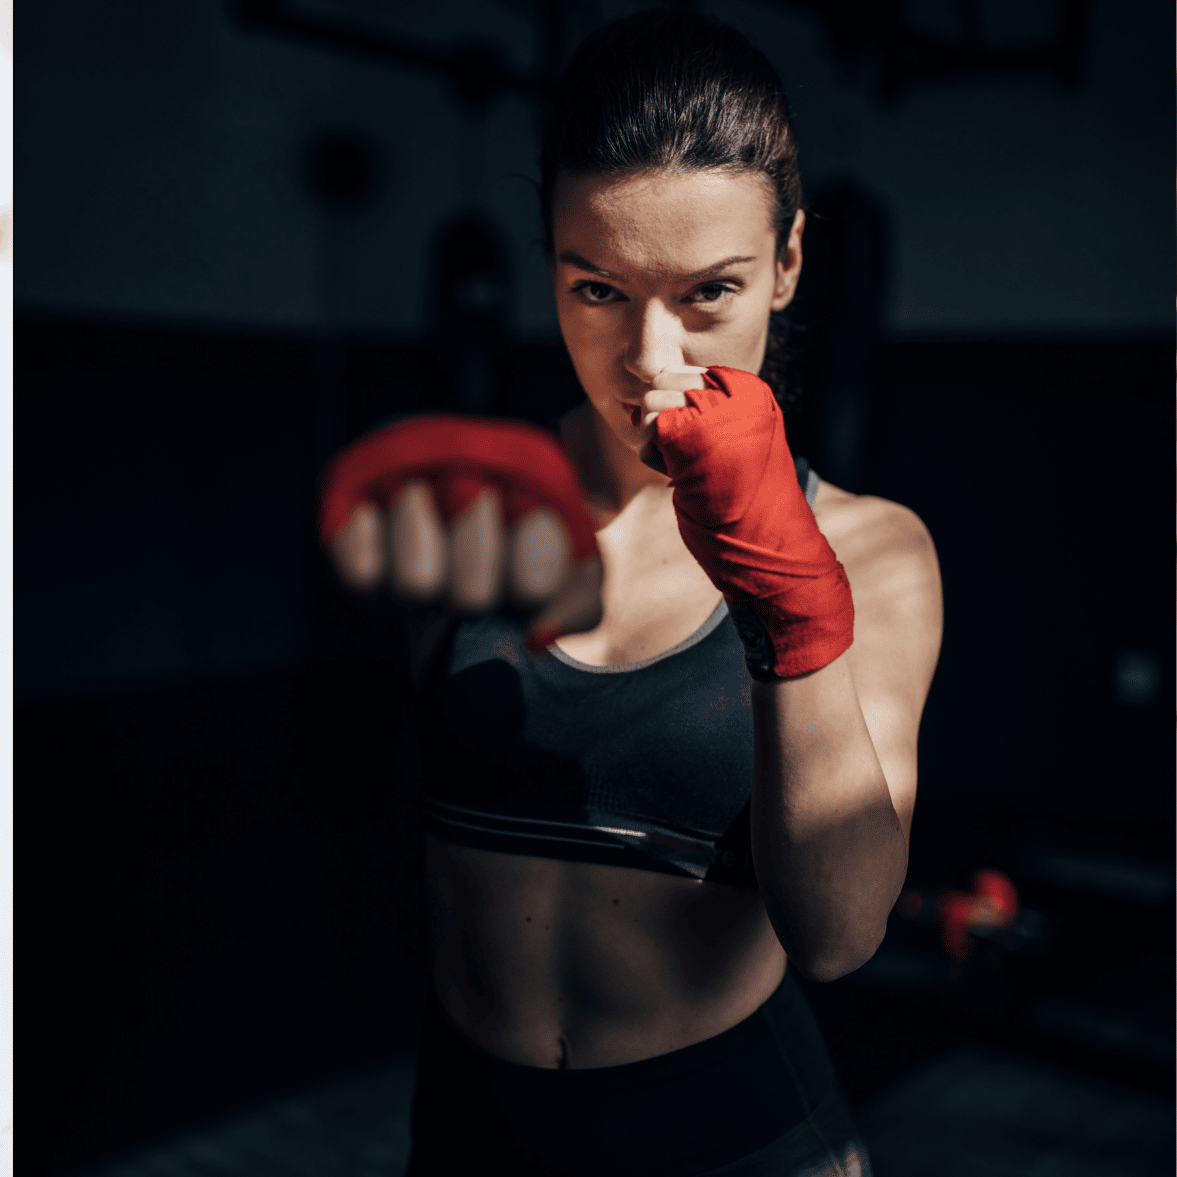 How to Throw Body Punches in Kickboxing - Guide for Beginners